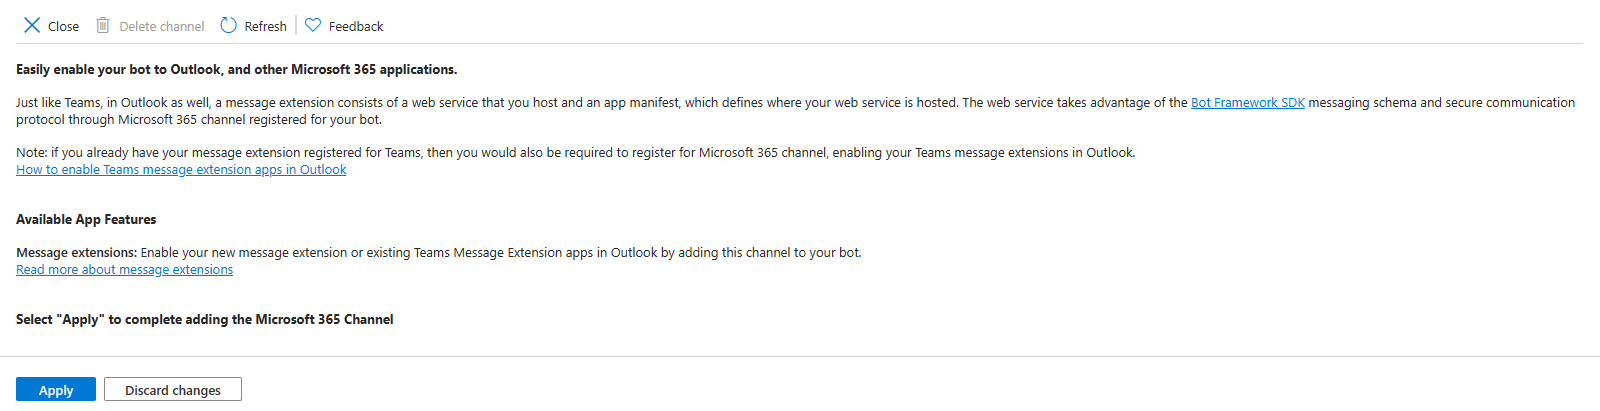 The panel to configure the "Microsoft 365" channel in the list of channels supported by the Azure Bot. There is a description of the purpose of the channel and an "Apply" button to add the channel to the list of channels supported by the Azure Bot.